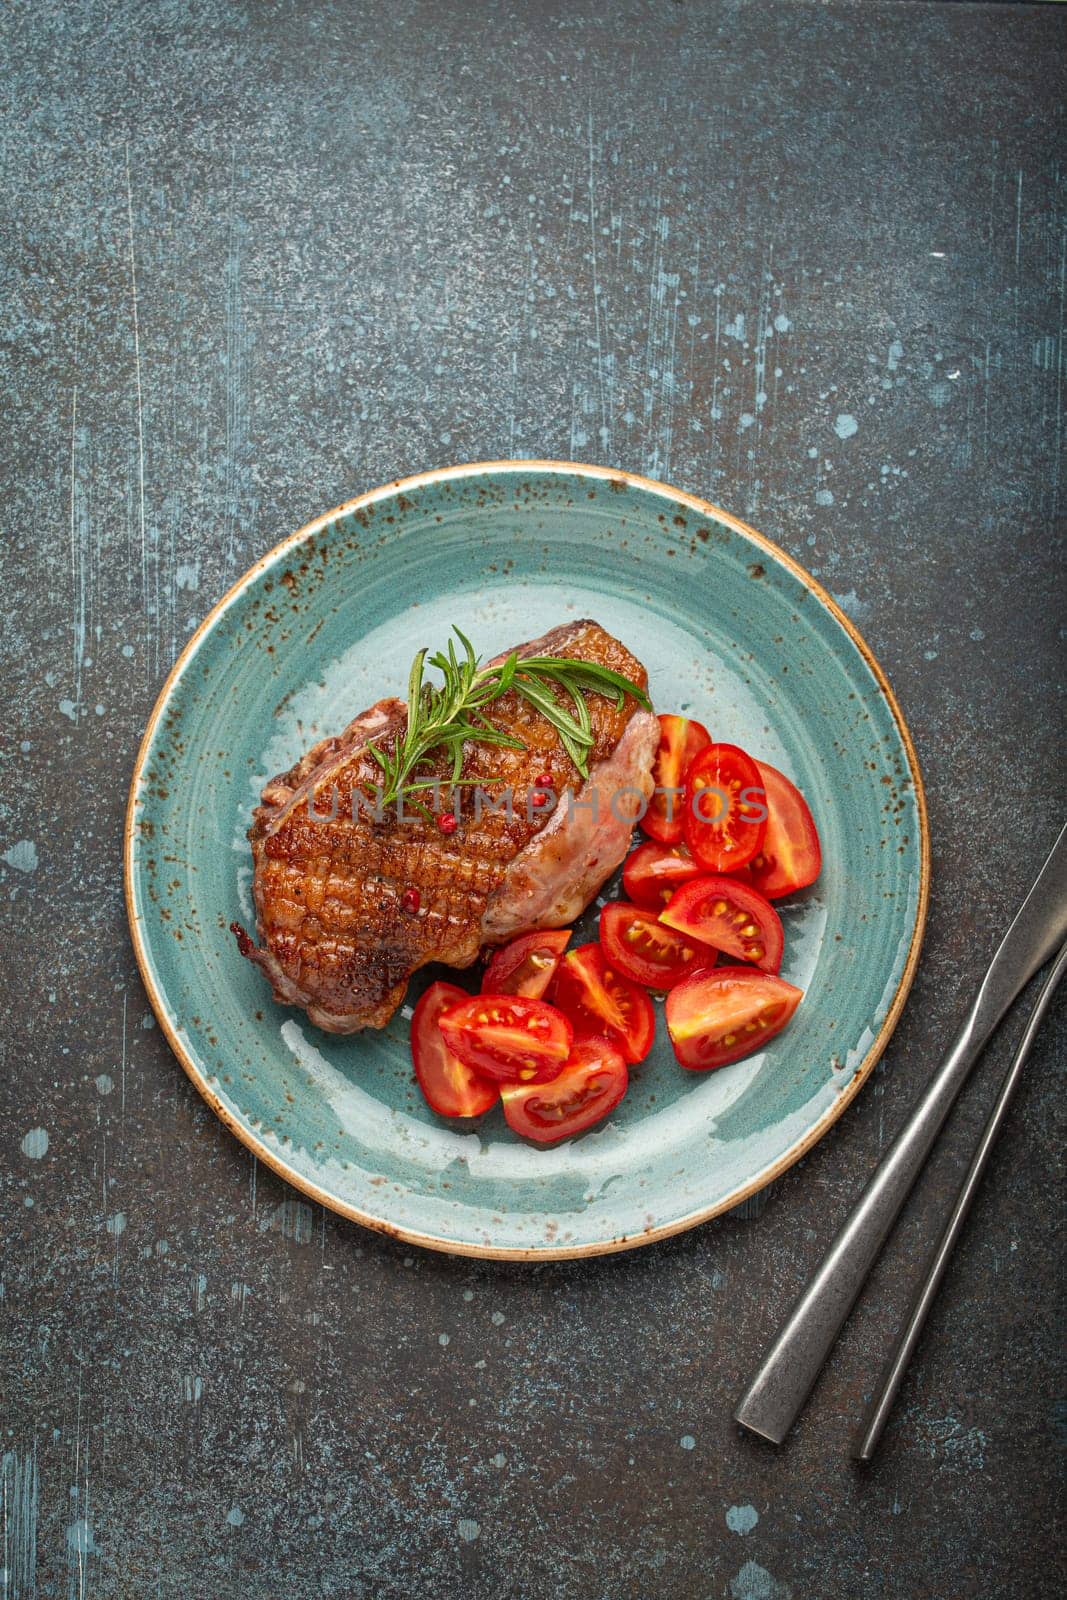 Delicious roasted duck breast fillet with golden crispy skin, with pepper and rosemary, top view on ceramic blue plate served with cherry tomatoes salad, rustic concrete rustic background by its_al_dente